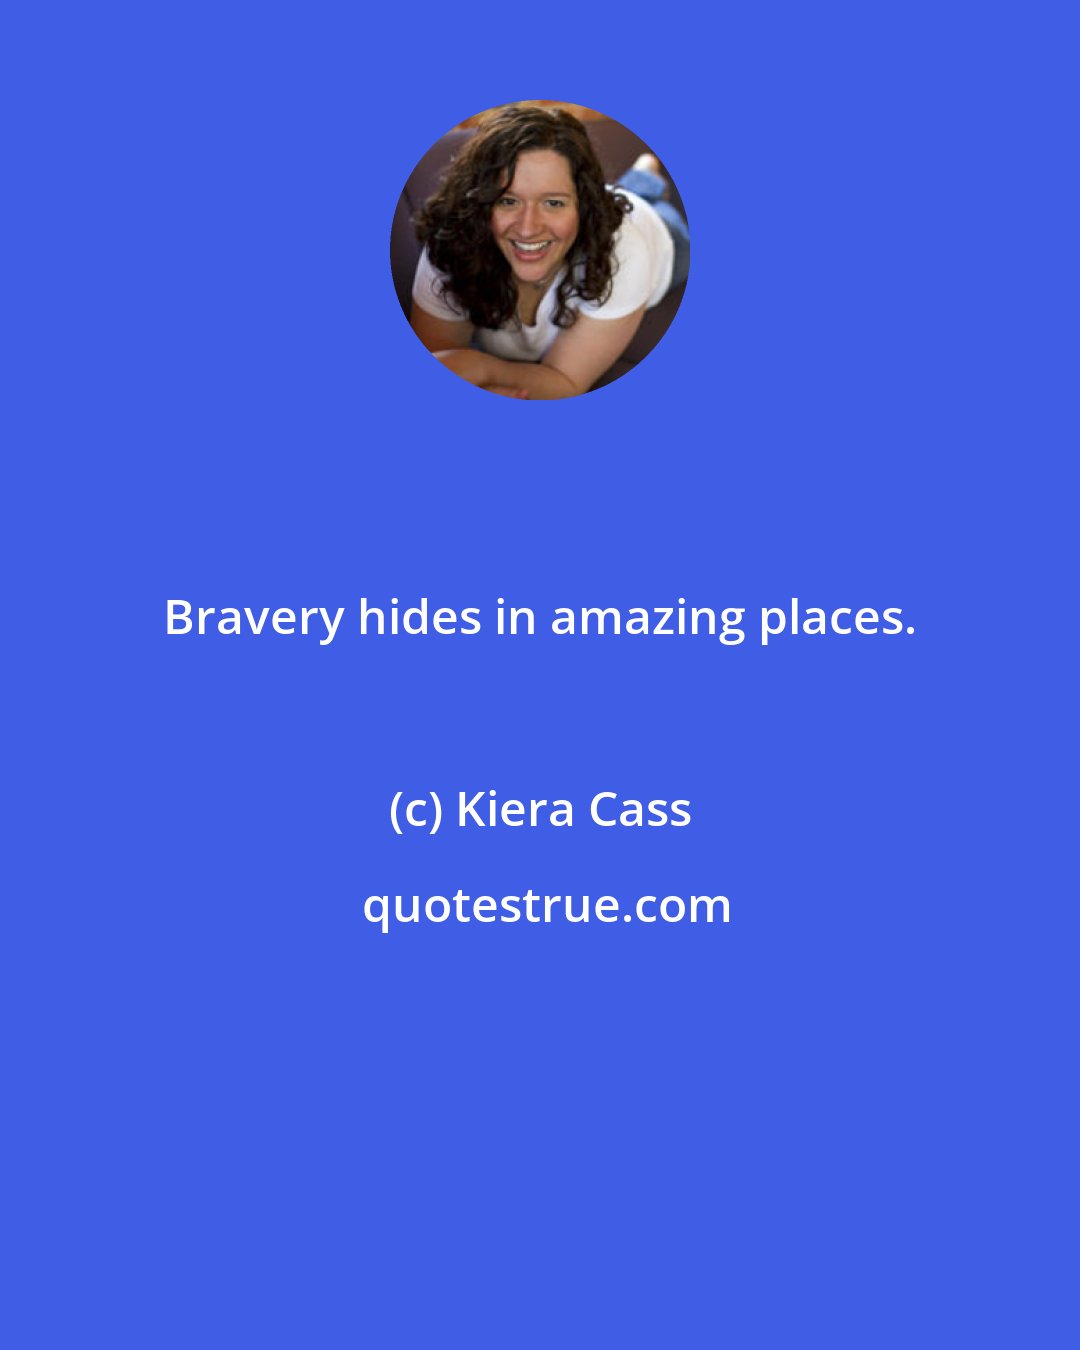 Kiera Cass: Bravery hides in amazing places.